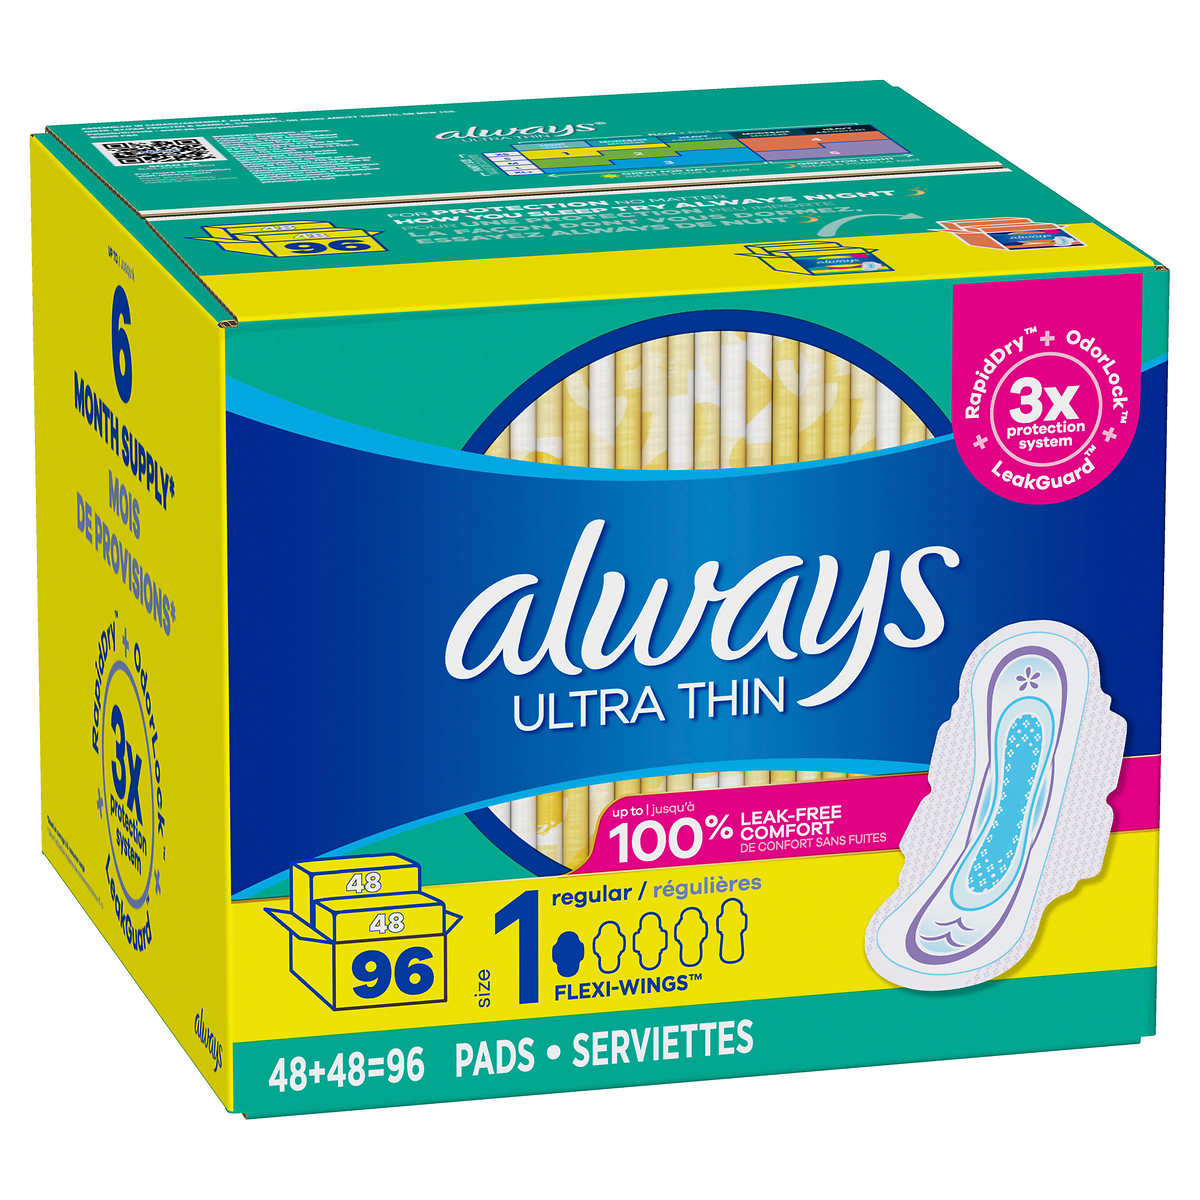 Always Ultra Thin Regular Pads, Unscented with Wings, 96 Count